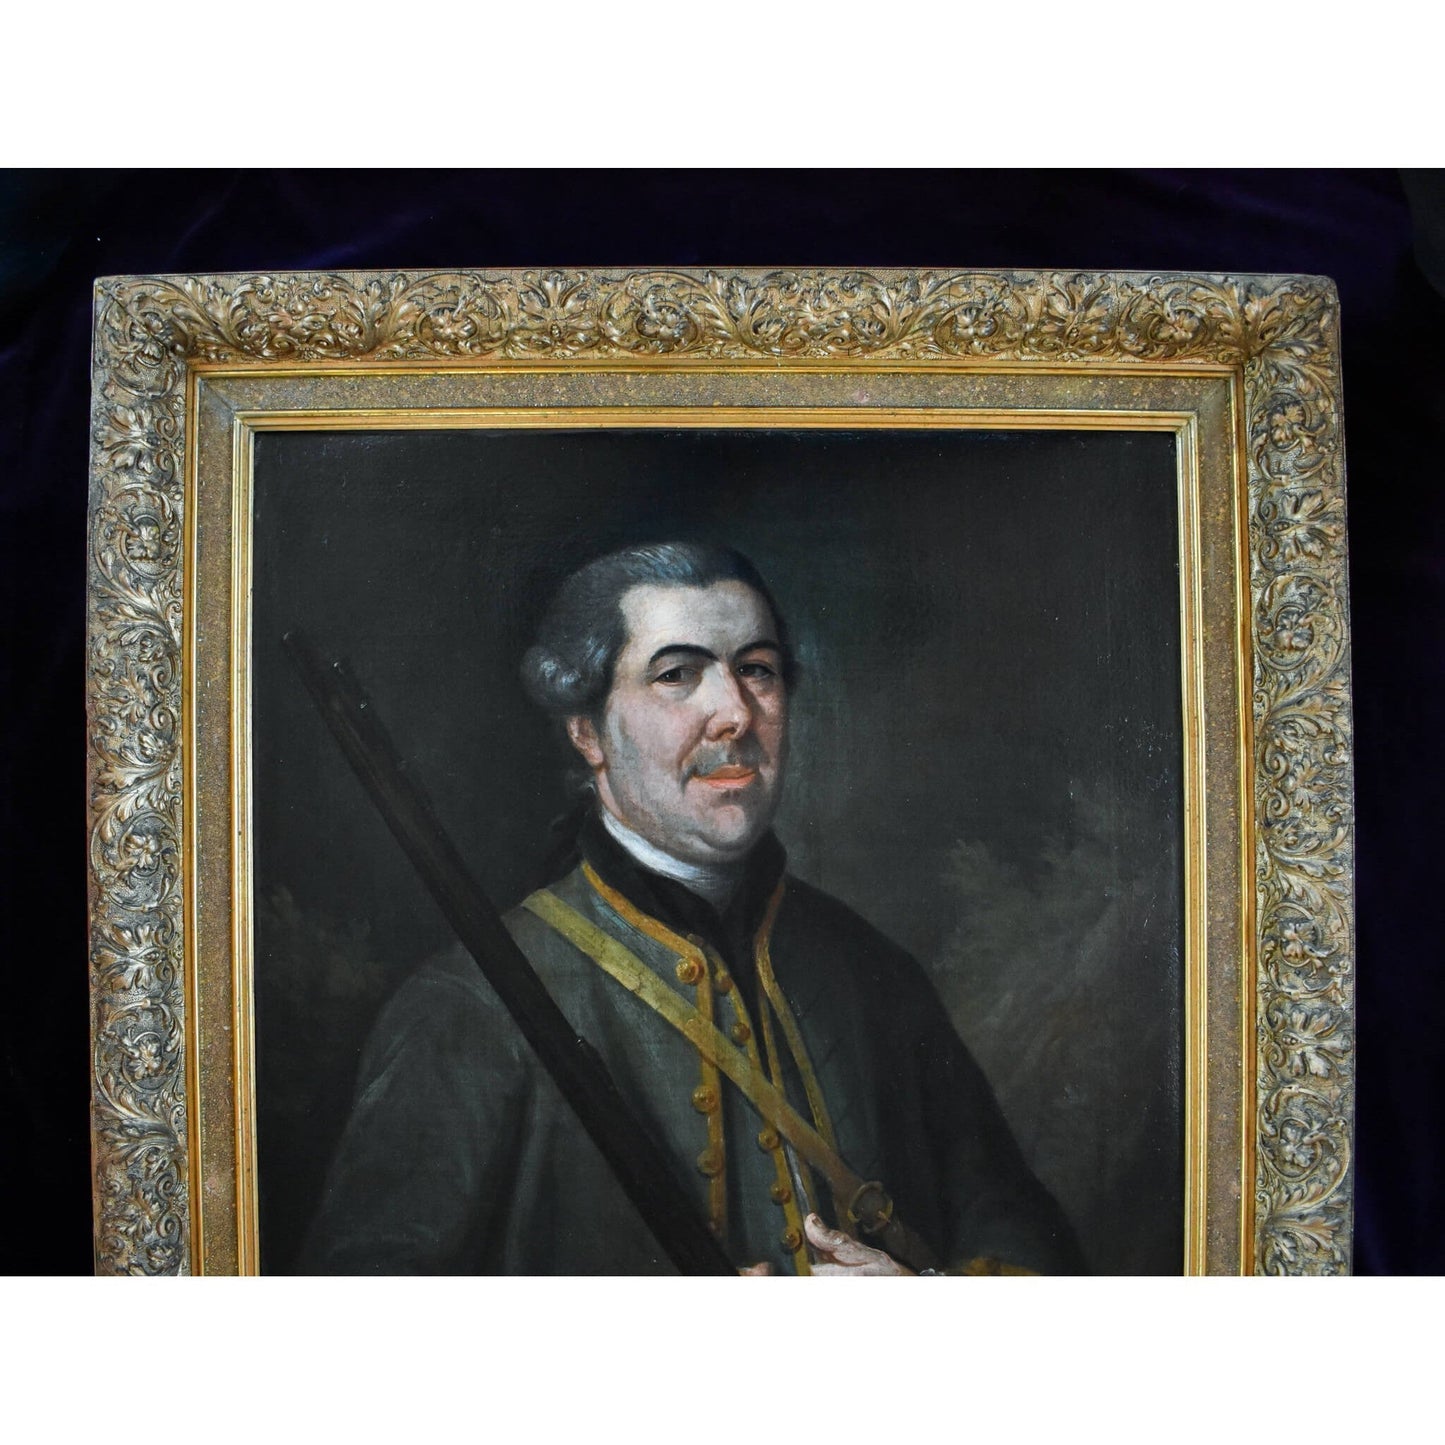 Antique portrait oil painting hunter french nobleman original 1758 by Georges de Roose for sale at Winckelmann Gallery